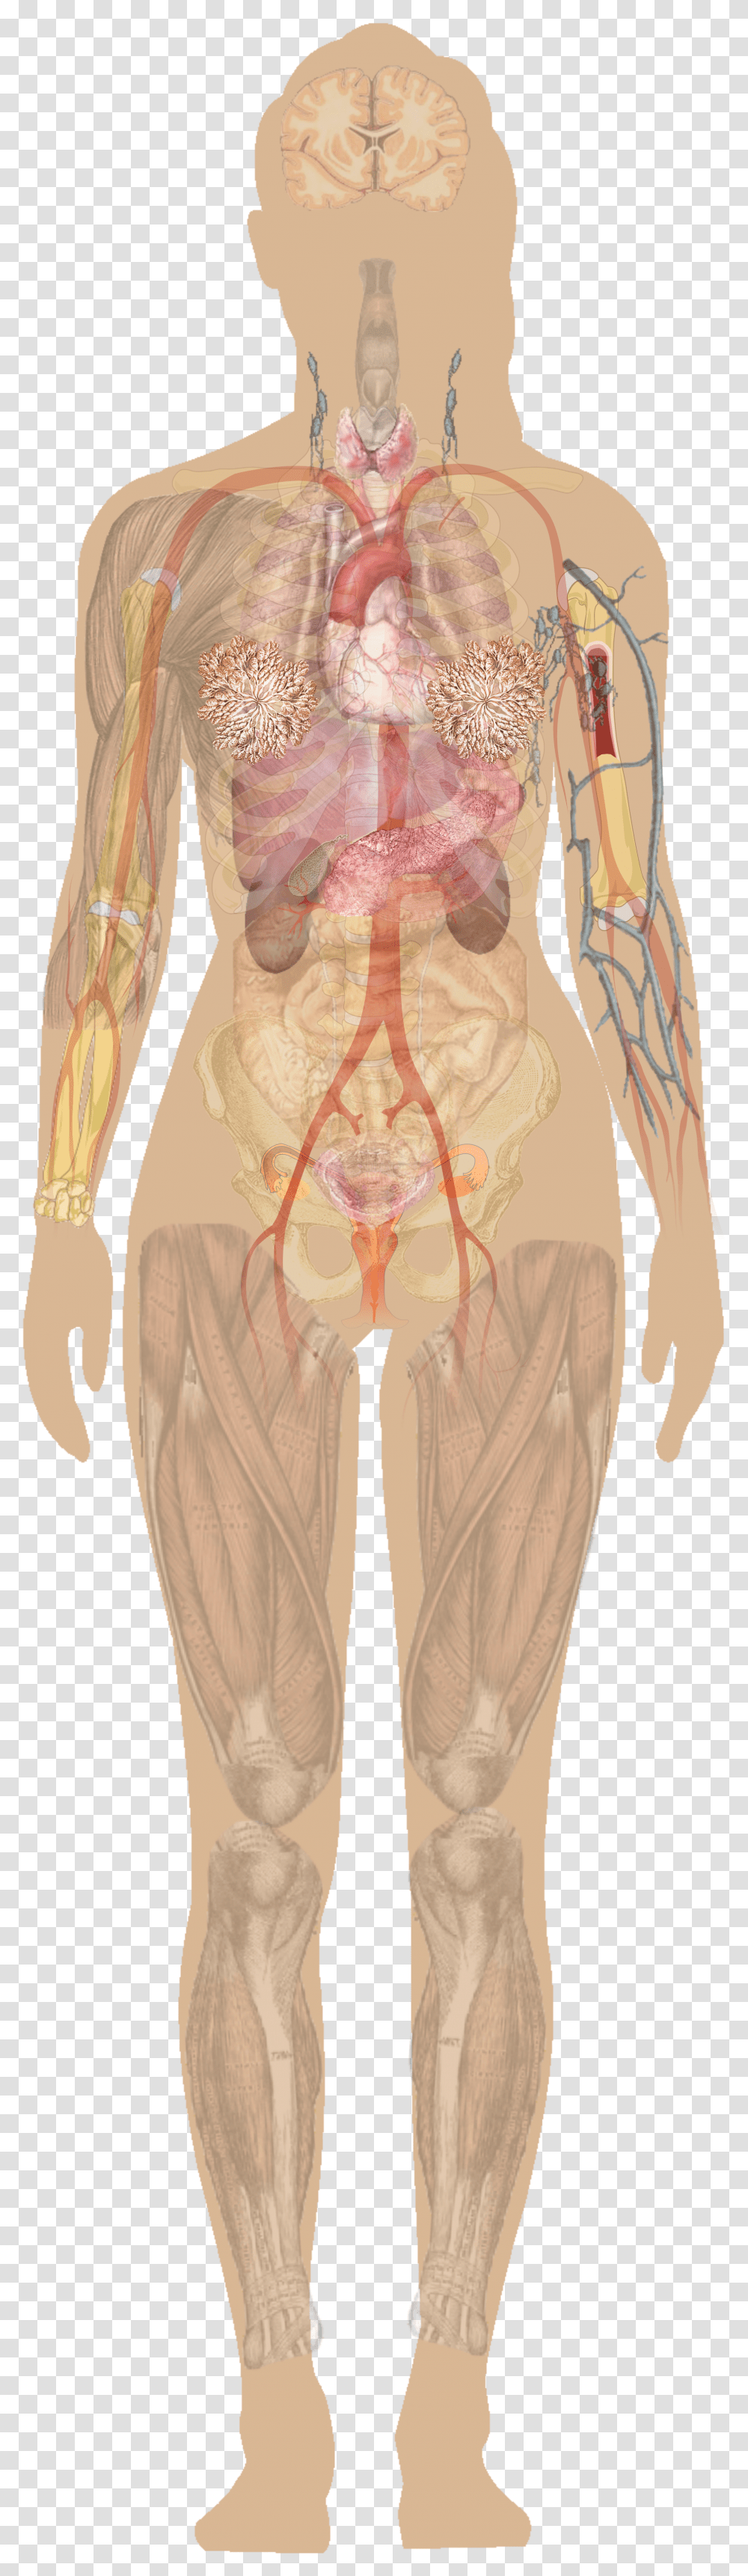 Muscular System Human Diagram Without Labels Transparent Png